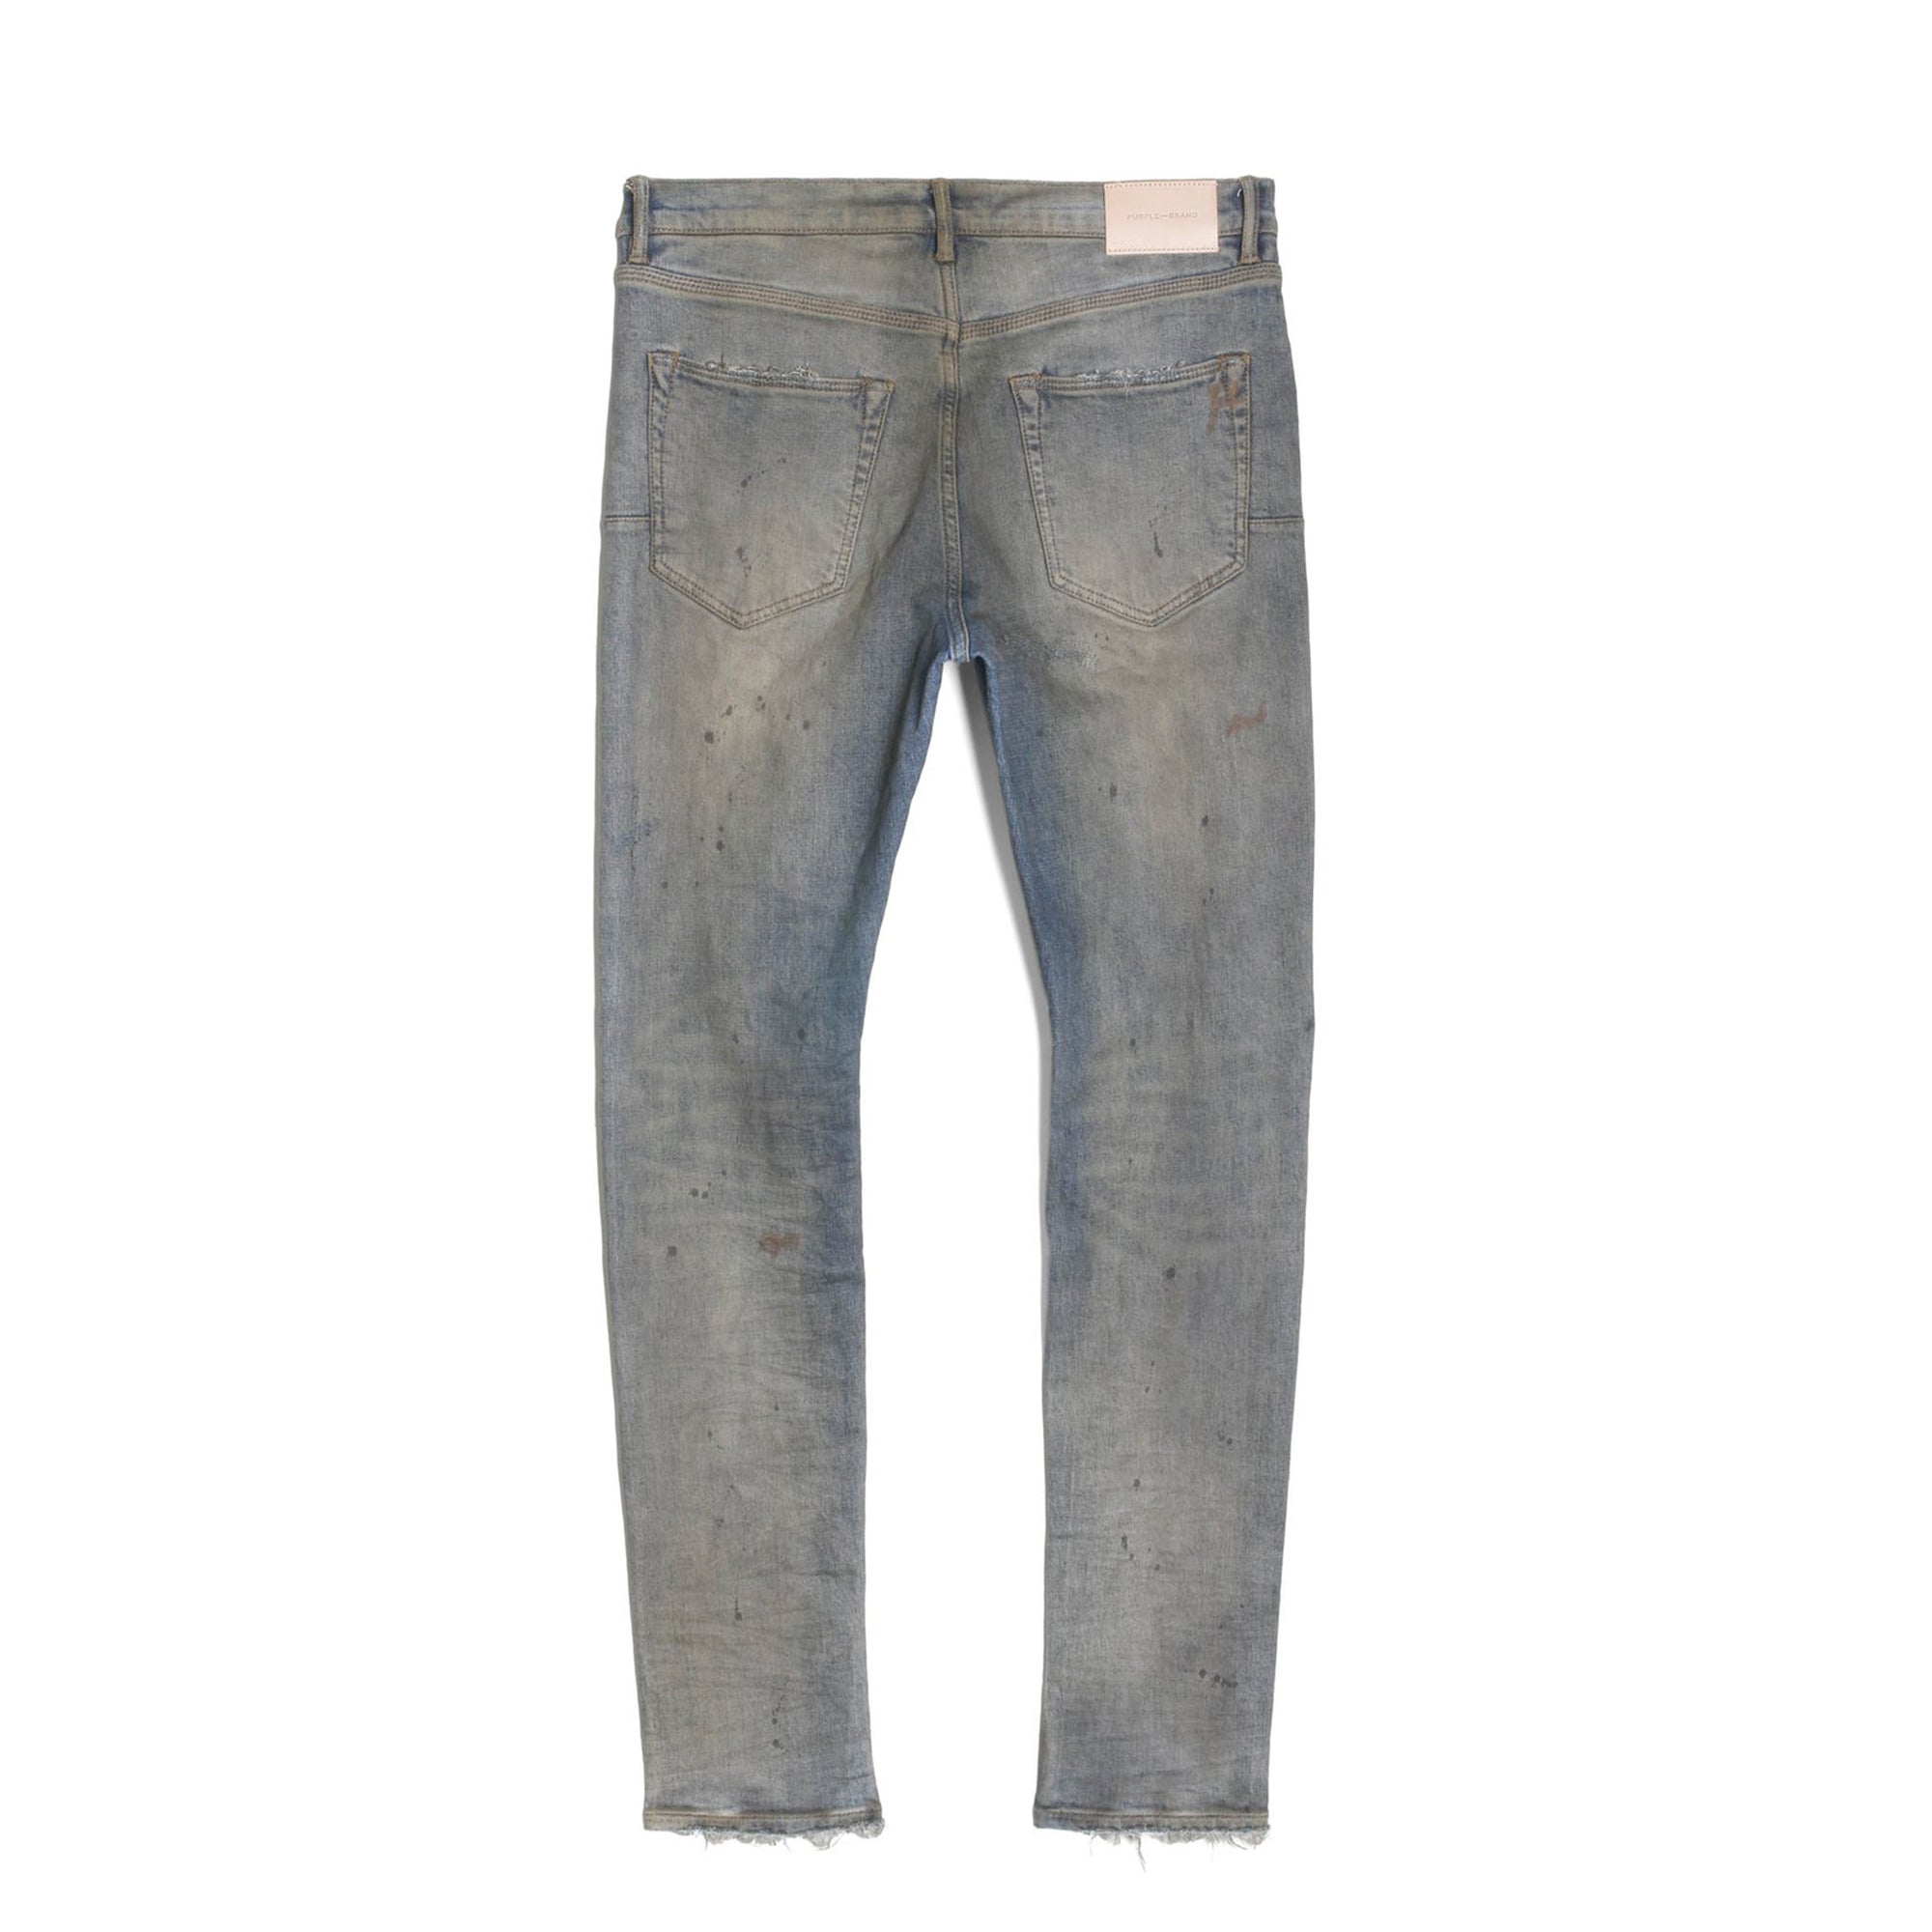 Purple-Brand Jeans - Ripped Brown Spots Limited Edition - Indigo